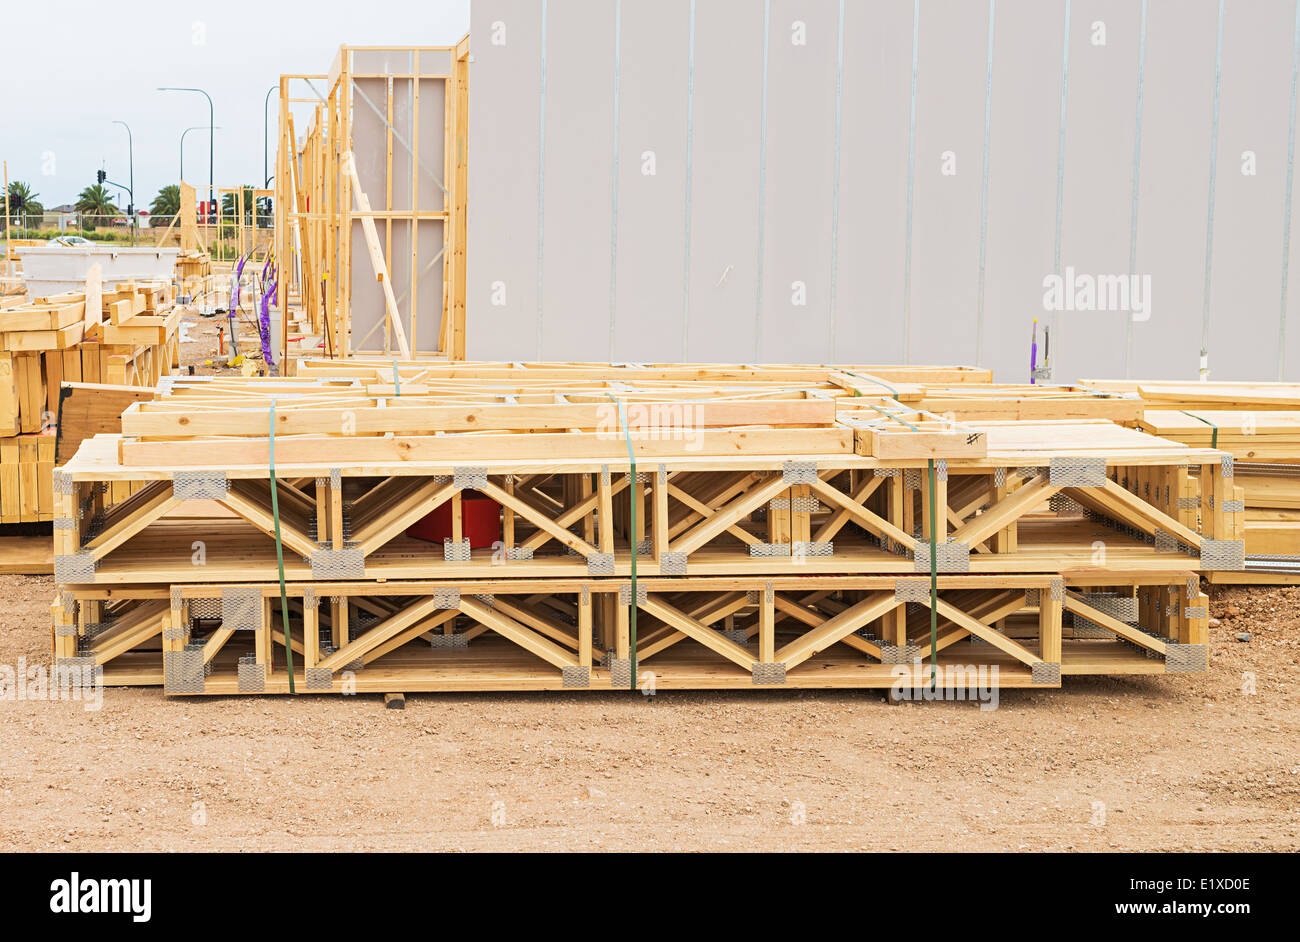 stack of wooden joists and building lumber at construction cite Stock Photo